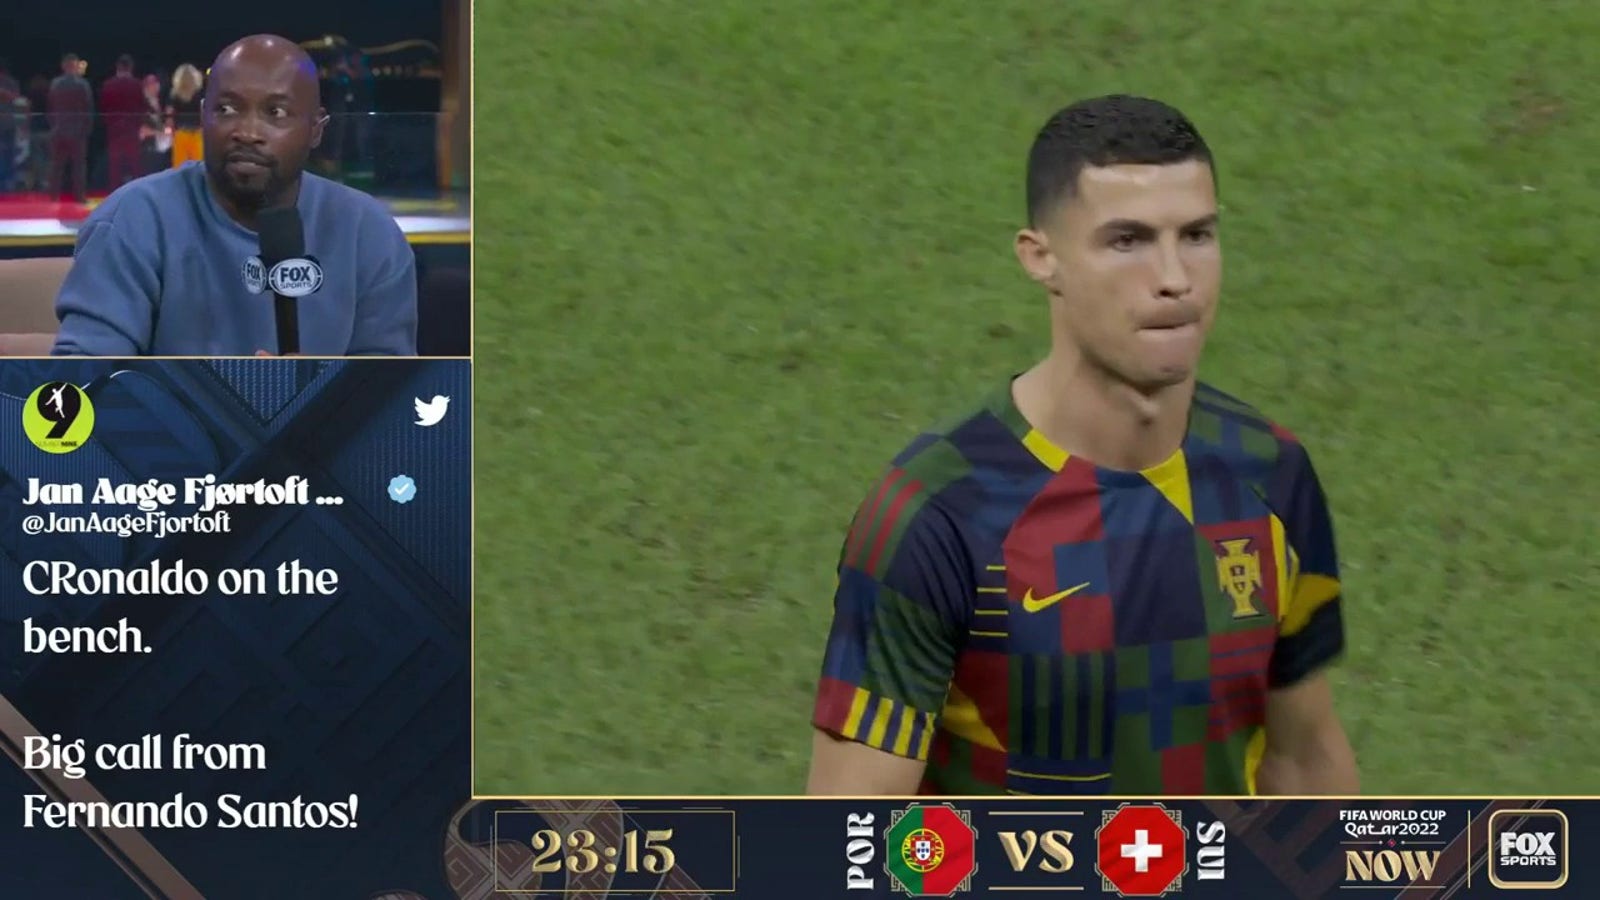 The 'FIFA World Cup Now' crew agrees with Portugal's decision to not start Ronaldo against Switzerland